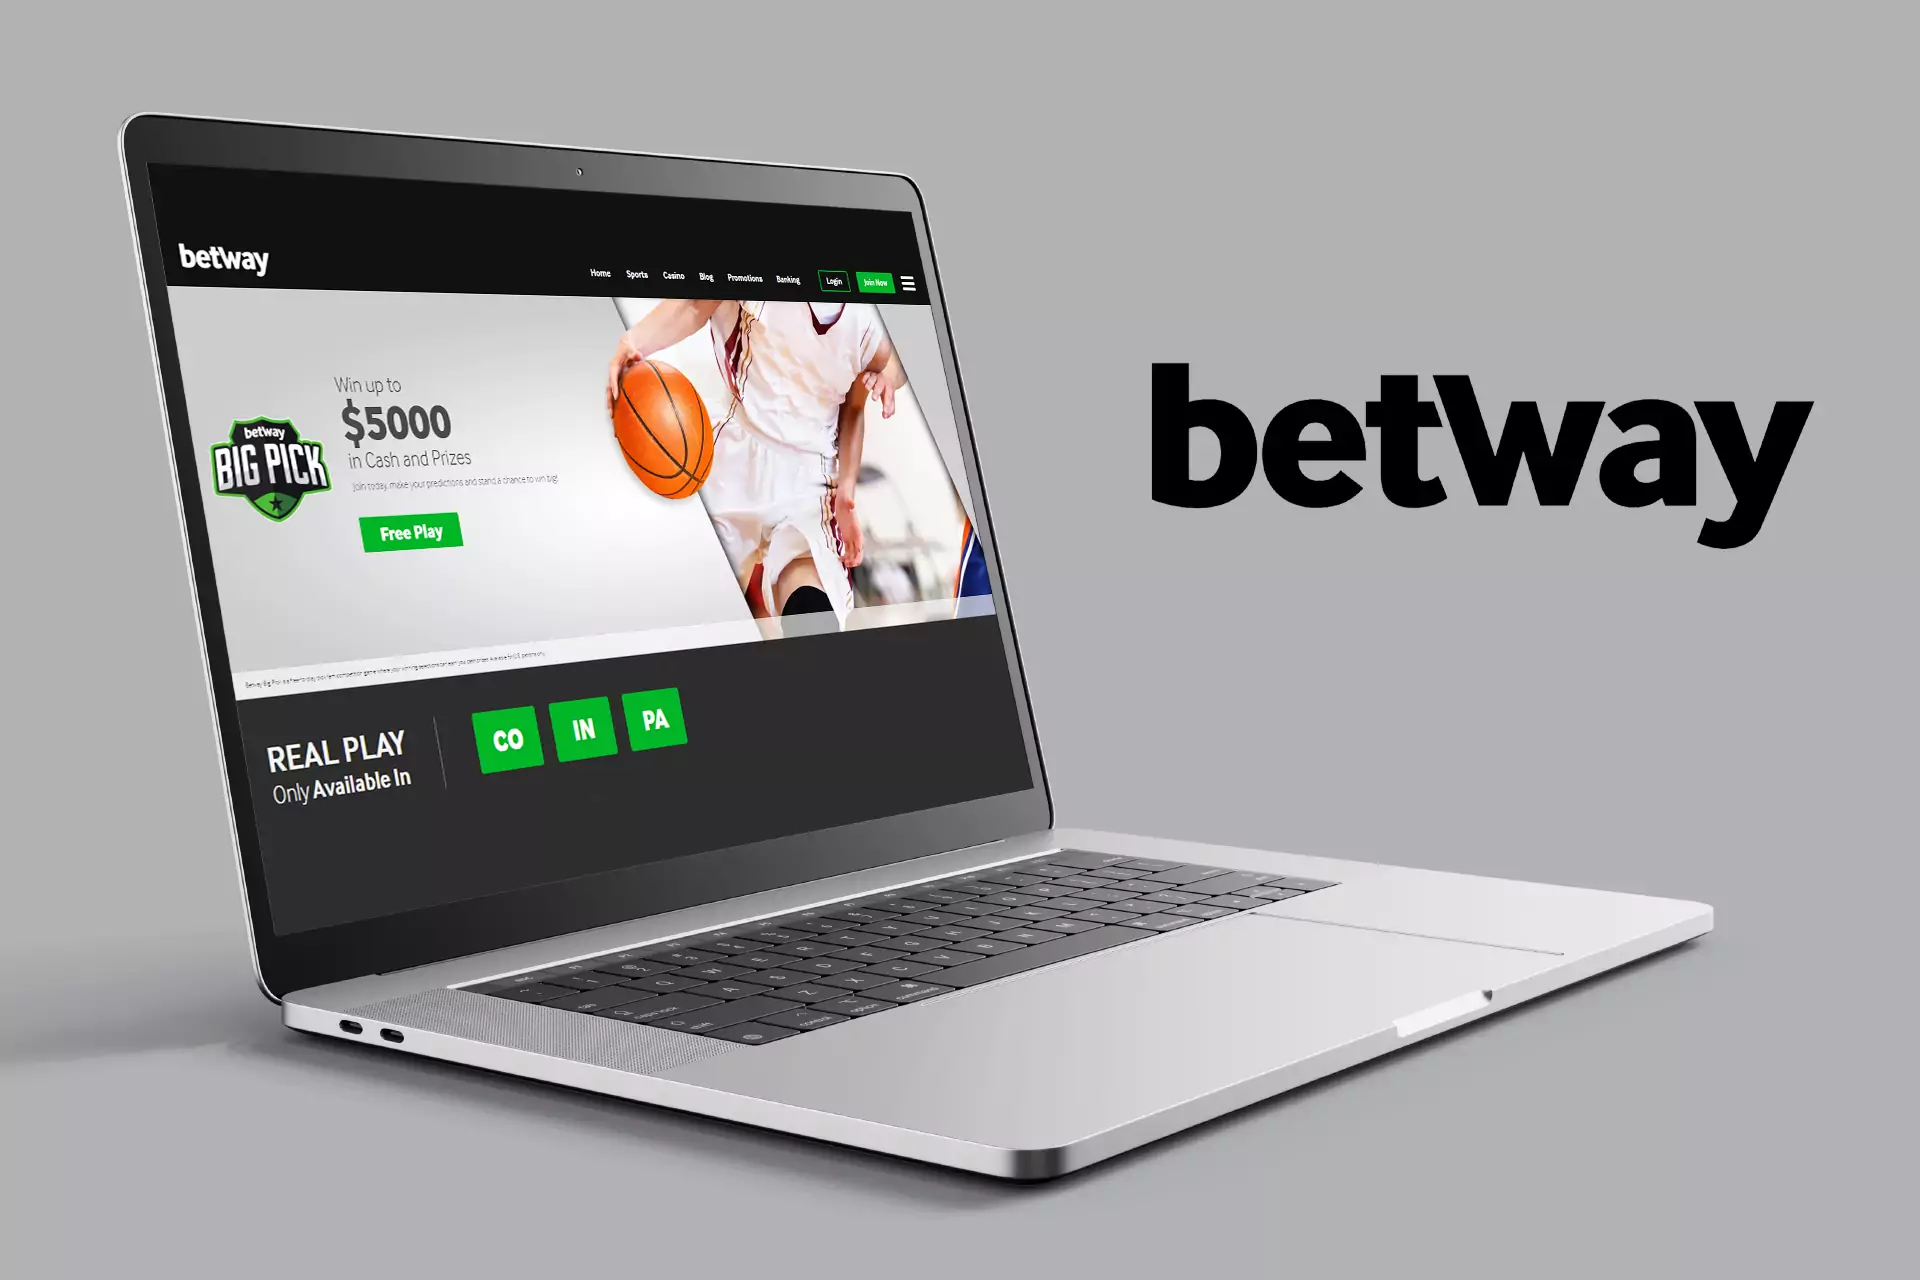 Betway is one of the most popular betting sites among US users.